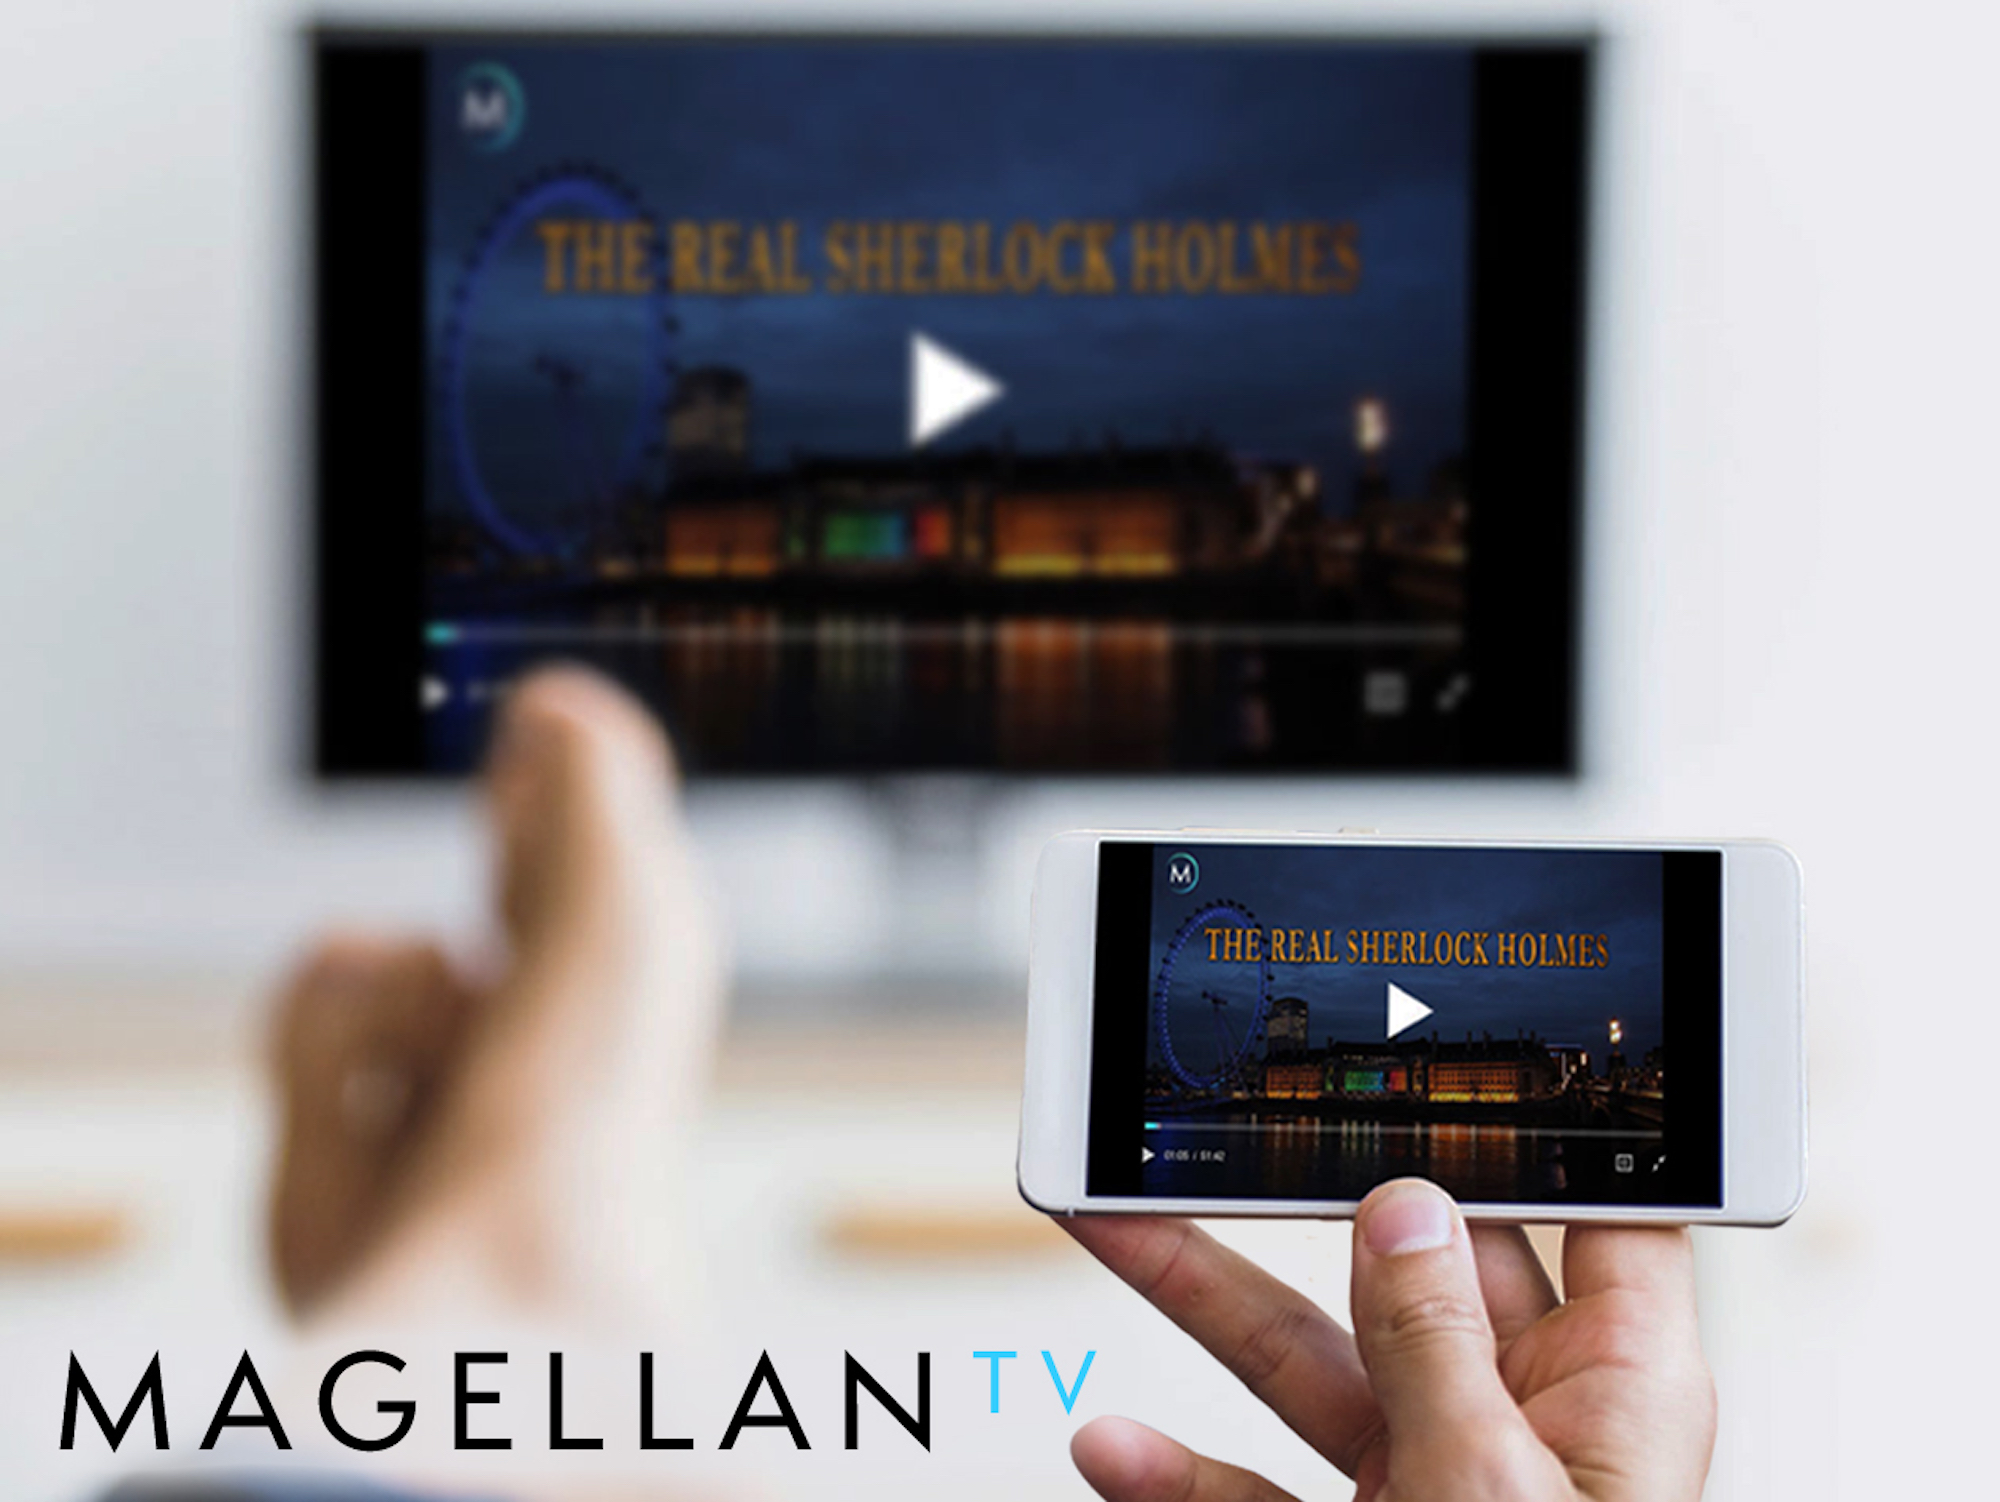 Wondering where to stream documentaries? Try MagellanTV for 3000+ things to watch